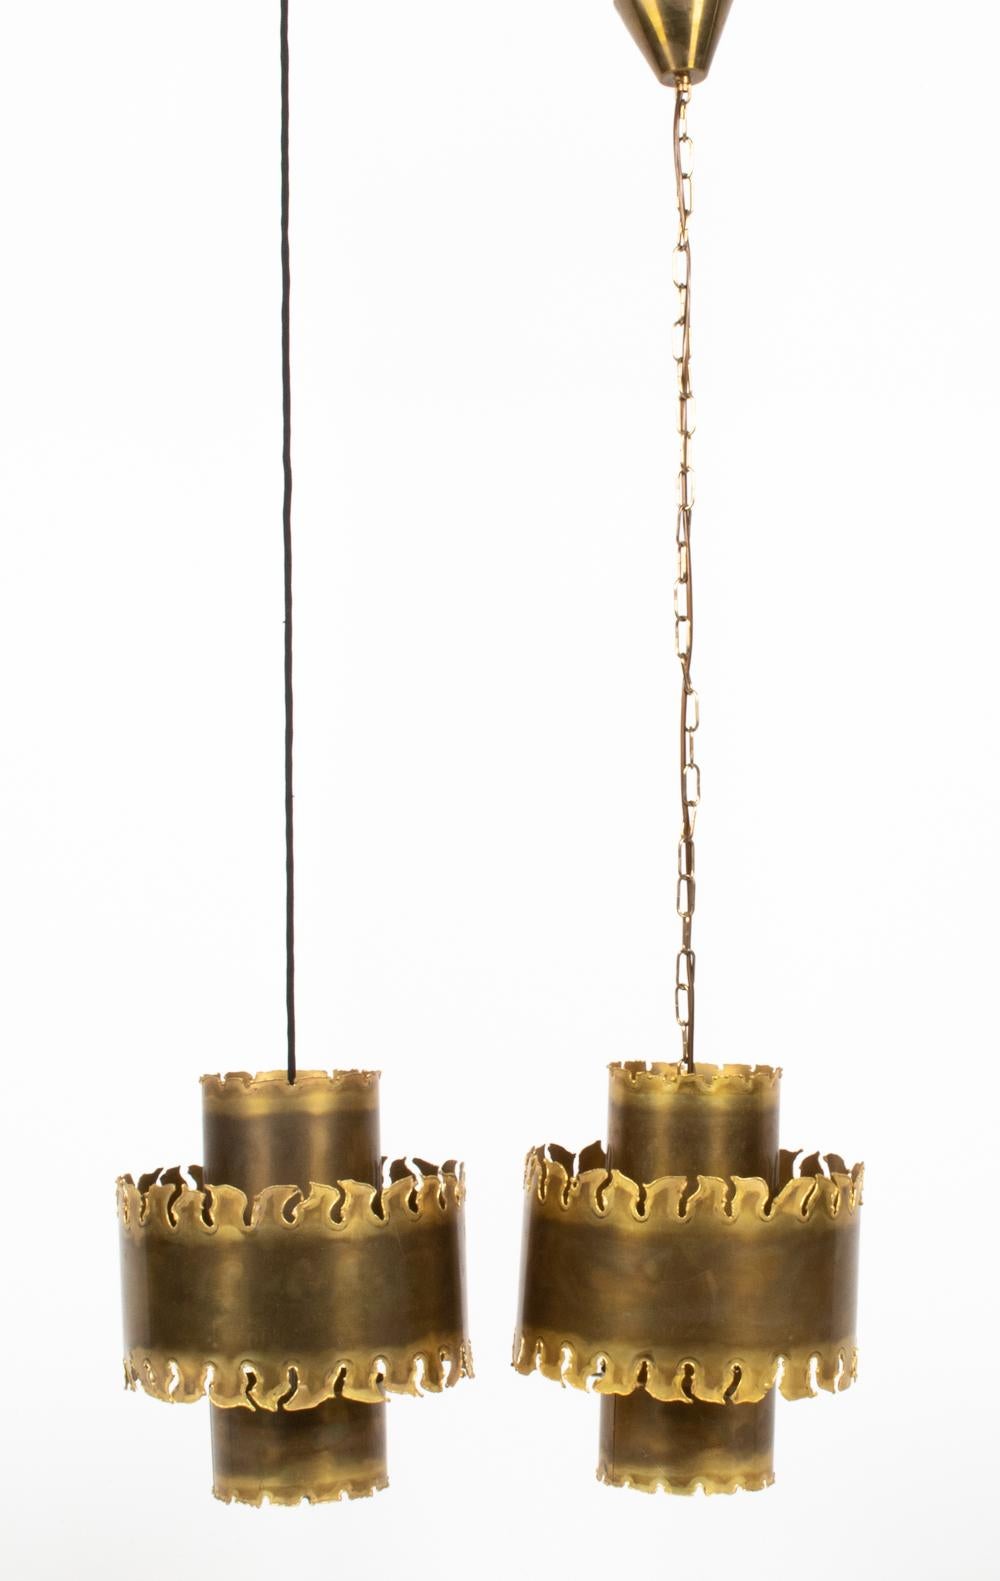 Transform your space with this striking pair of pendant lights in patinated and torch-cut brass, whose dramatic flame-like edges evoke the very implement with which they were formed. Designed and produced by the famous Danish lighting firm Holm